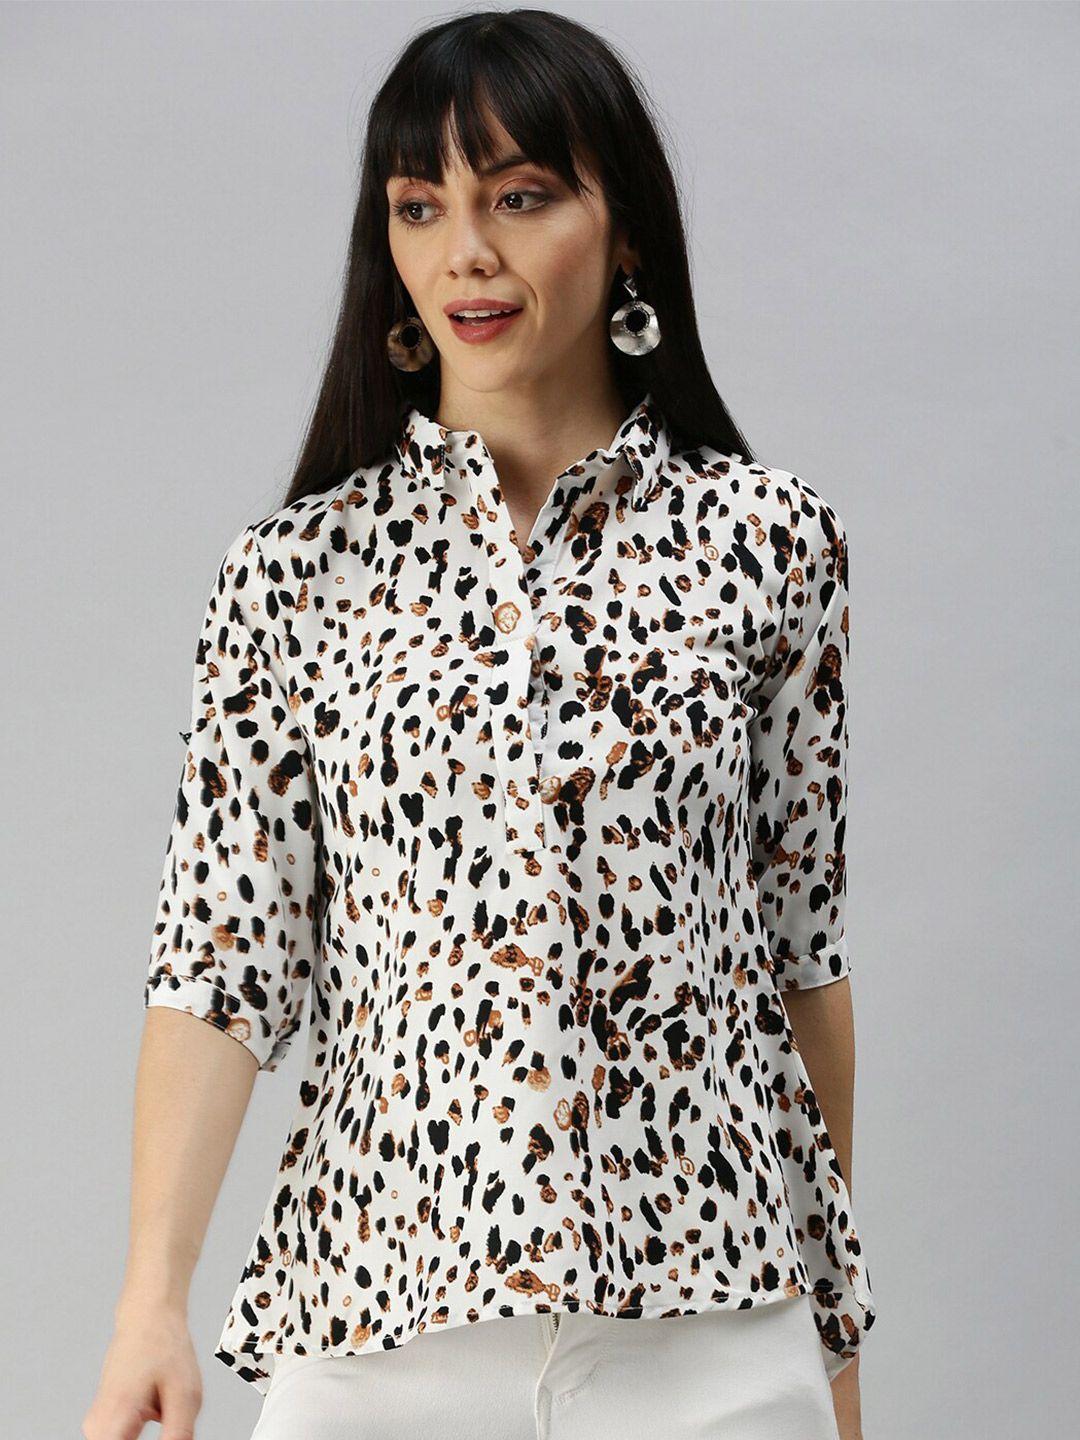 showoff-animal-print-georgette-shirt-style-top